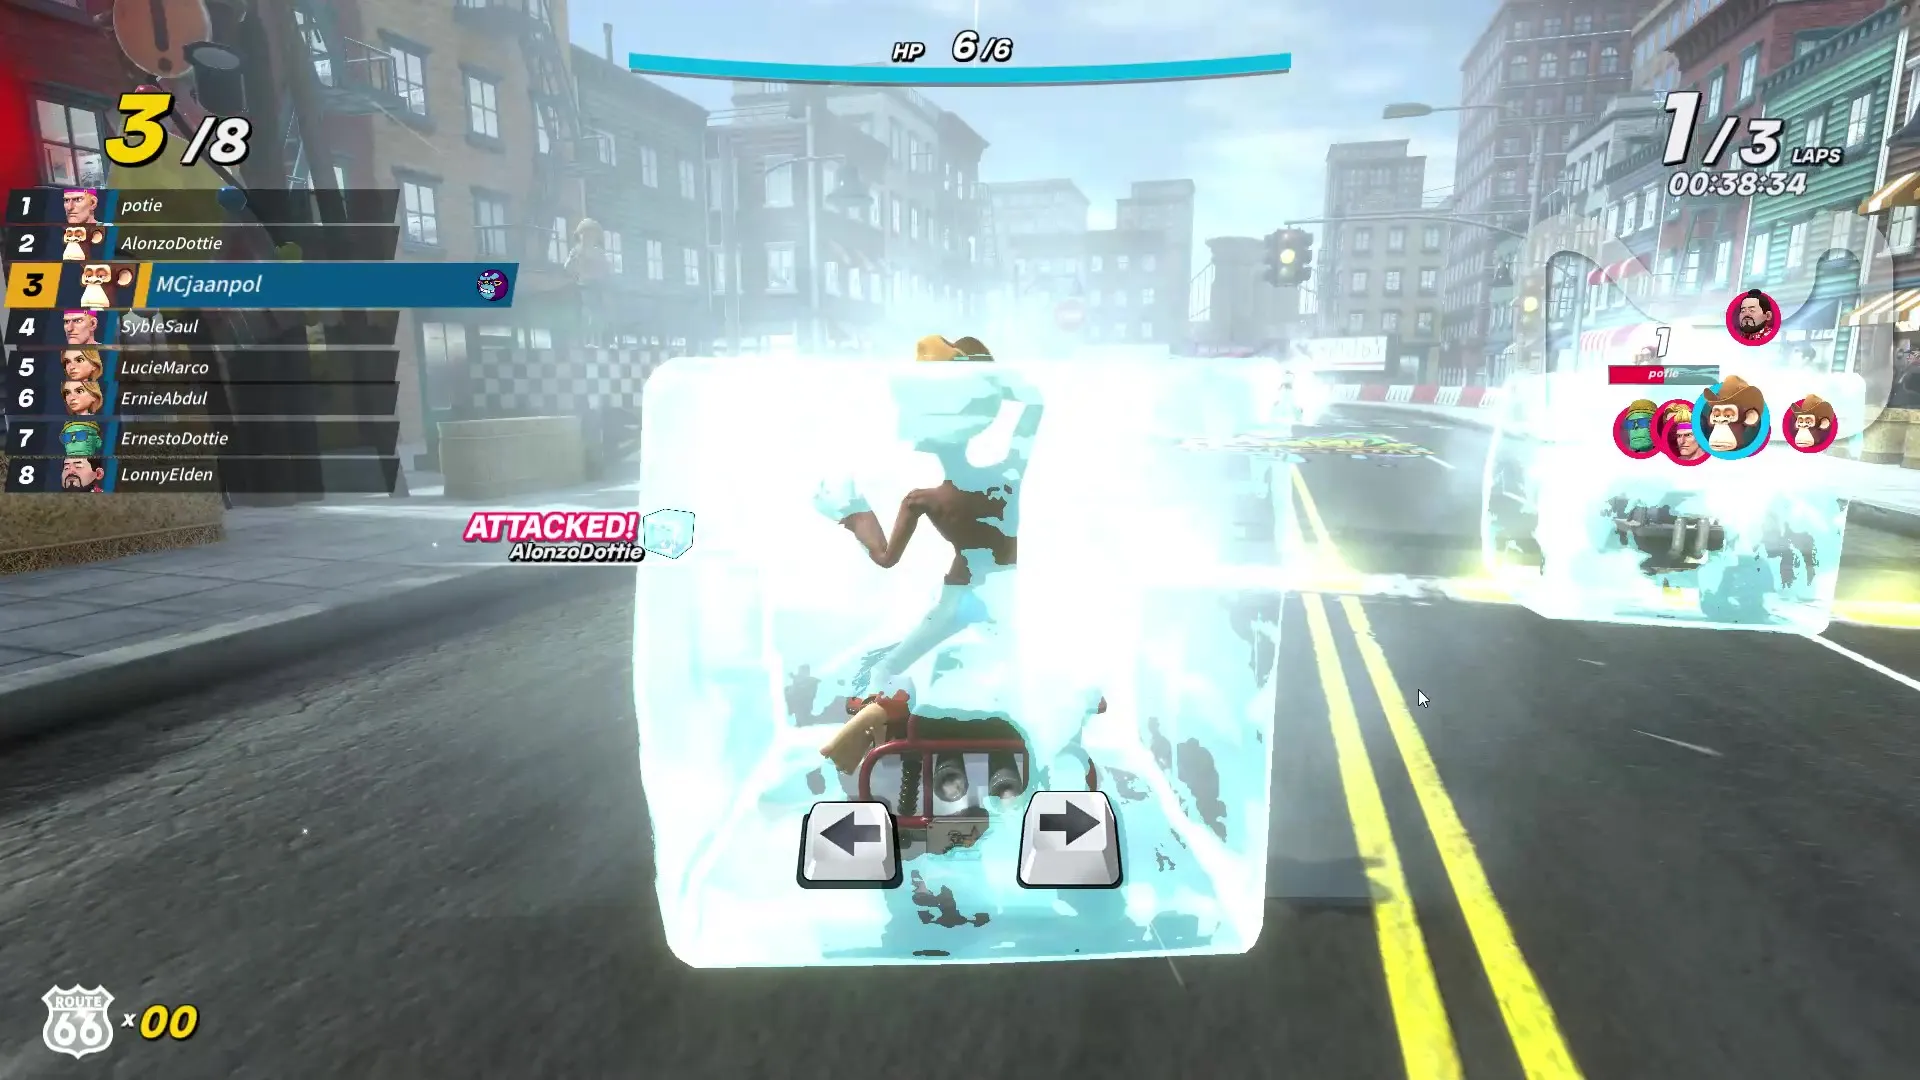 An ice attack landed on the opponents. The player is now frozen and needs to click the left and right arrow to remove it. This attack can slow down the player greatly.